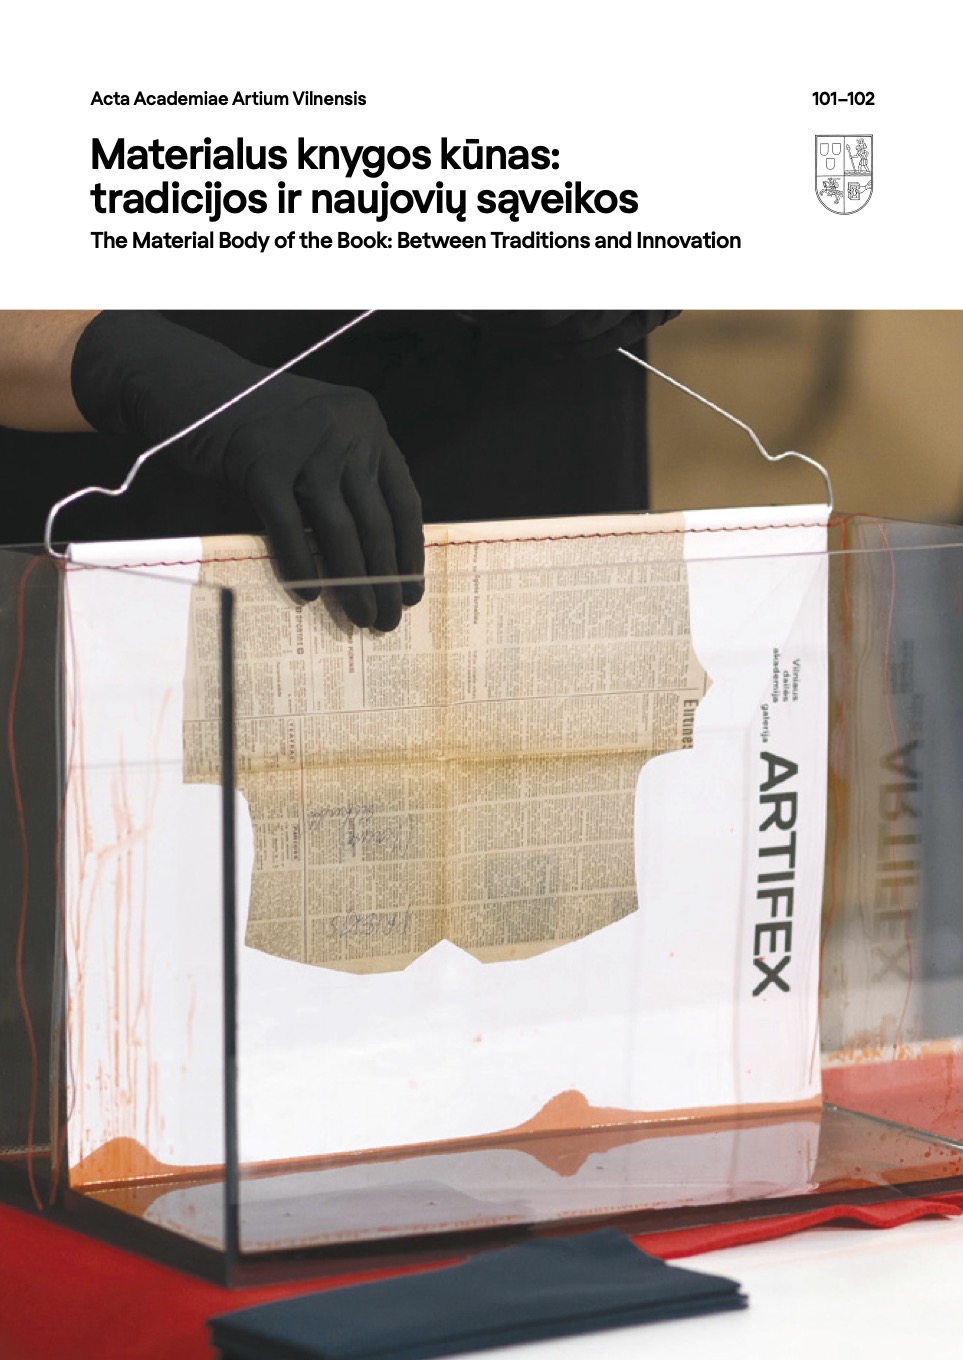 					View No. 101-102 (2021): The Material Body of the Book: Between Traditions and Innovation
				